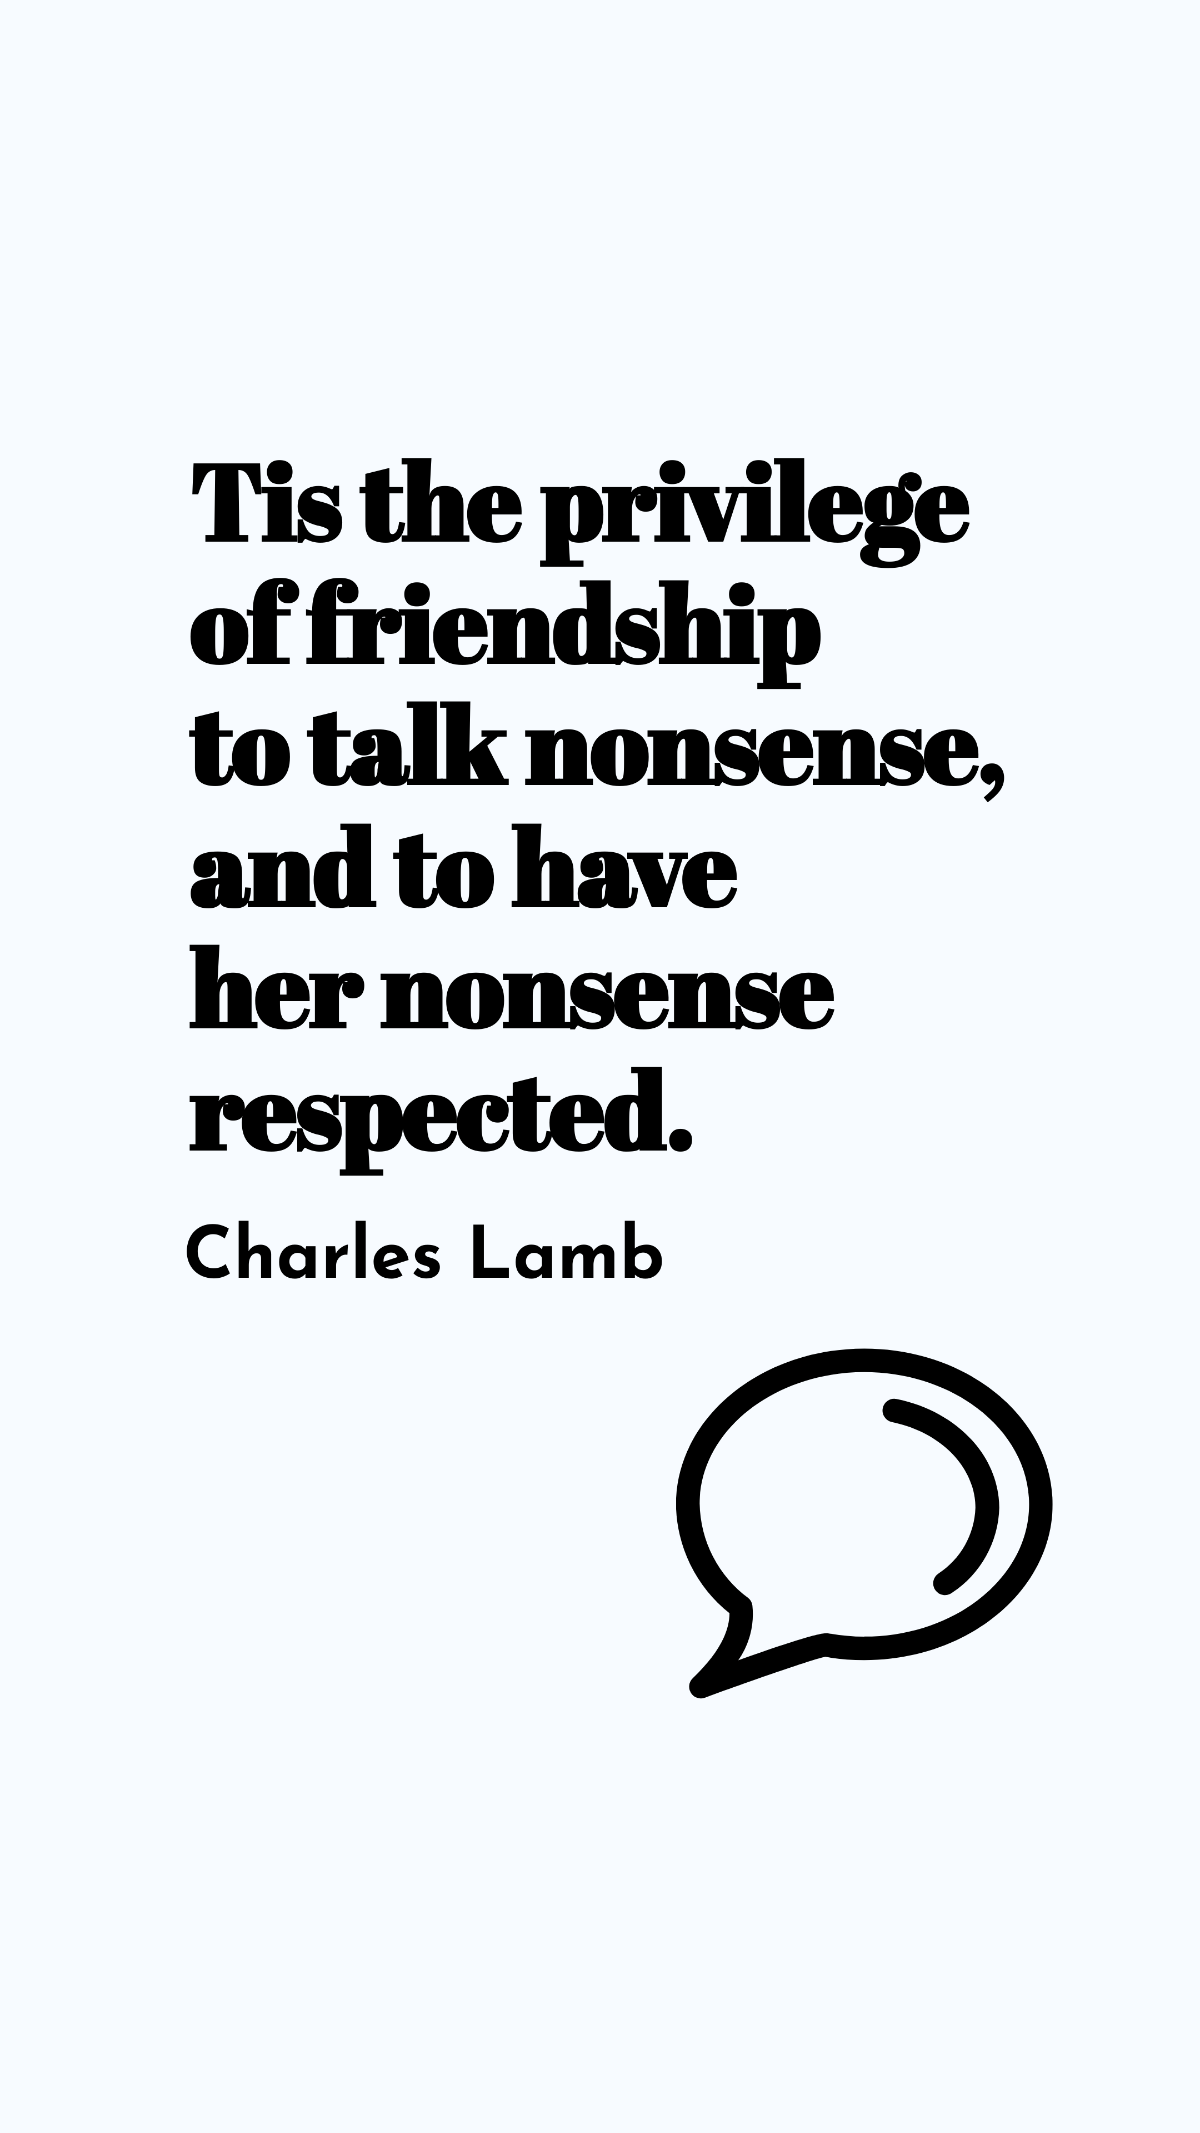 Charles Lamb - Tis the privilege of friendship to talk nonsense, and to have her nonsense respected. Template